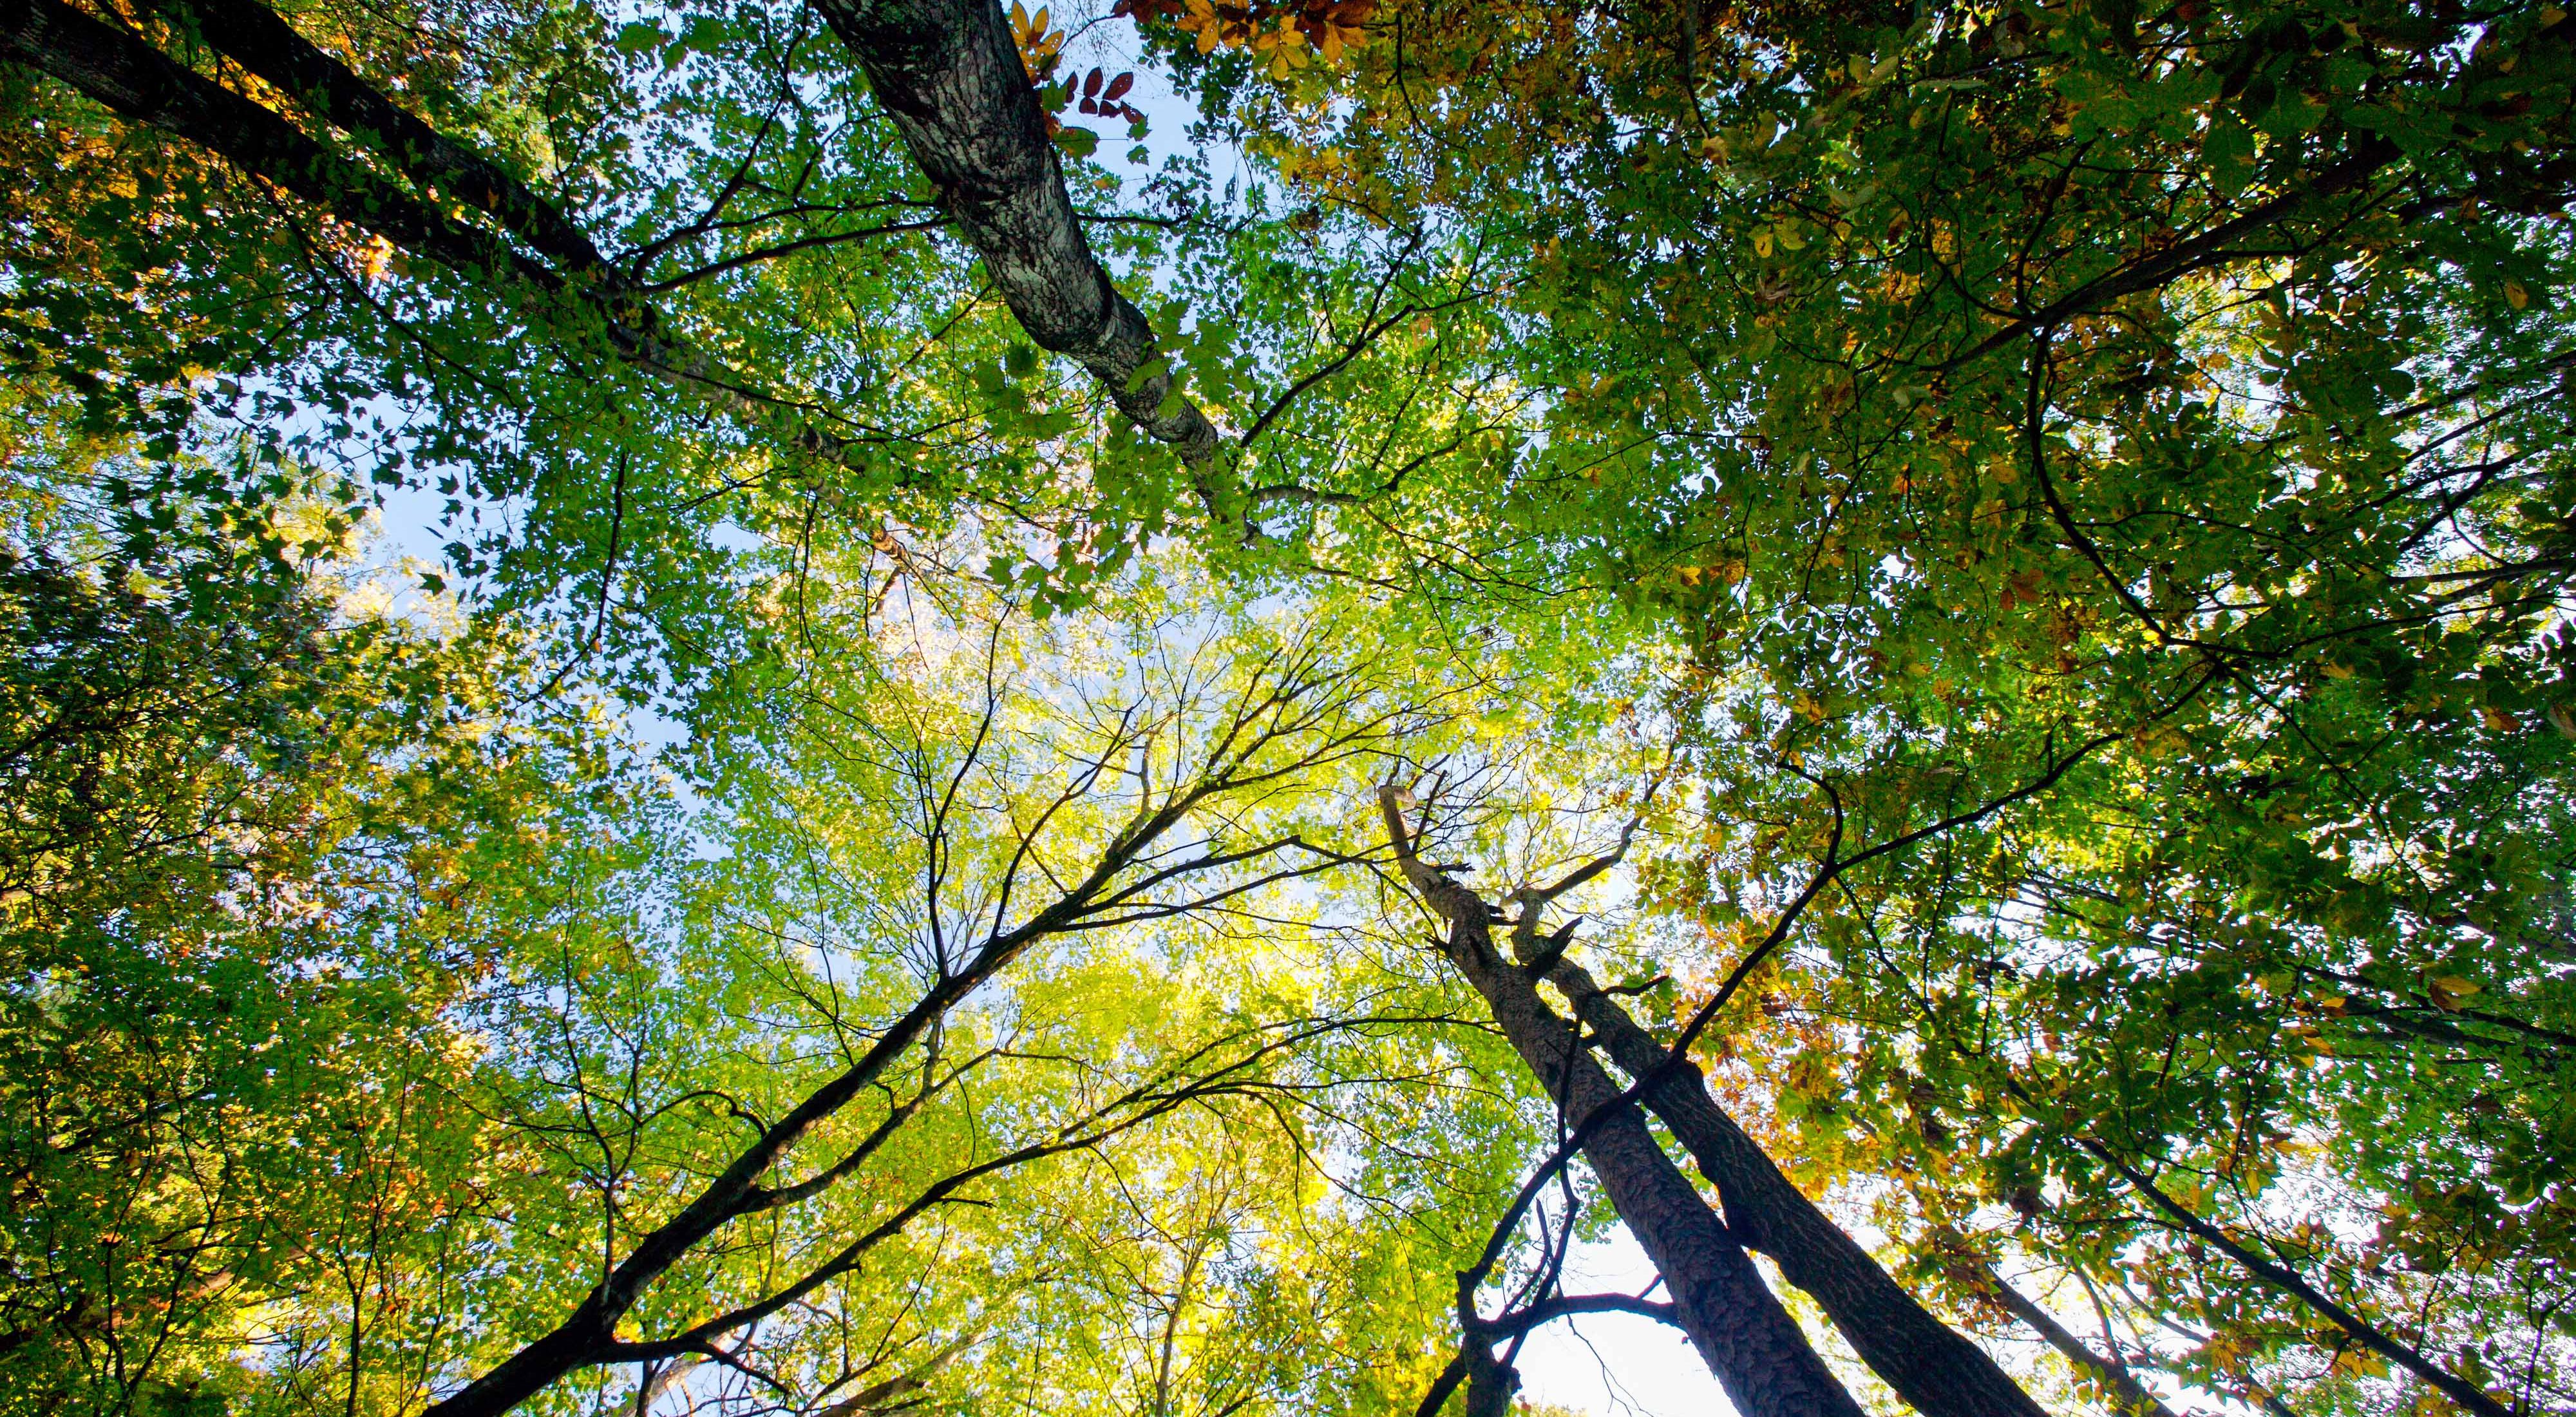 A view up through the forest canopy at Marshall Forest Preserve, GA